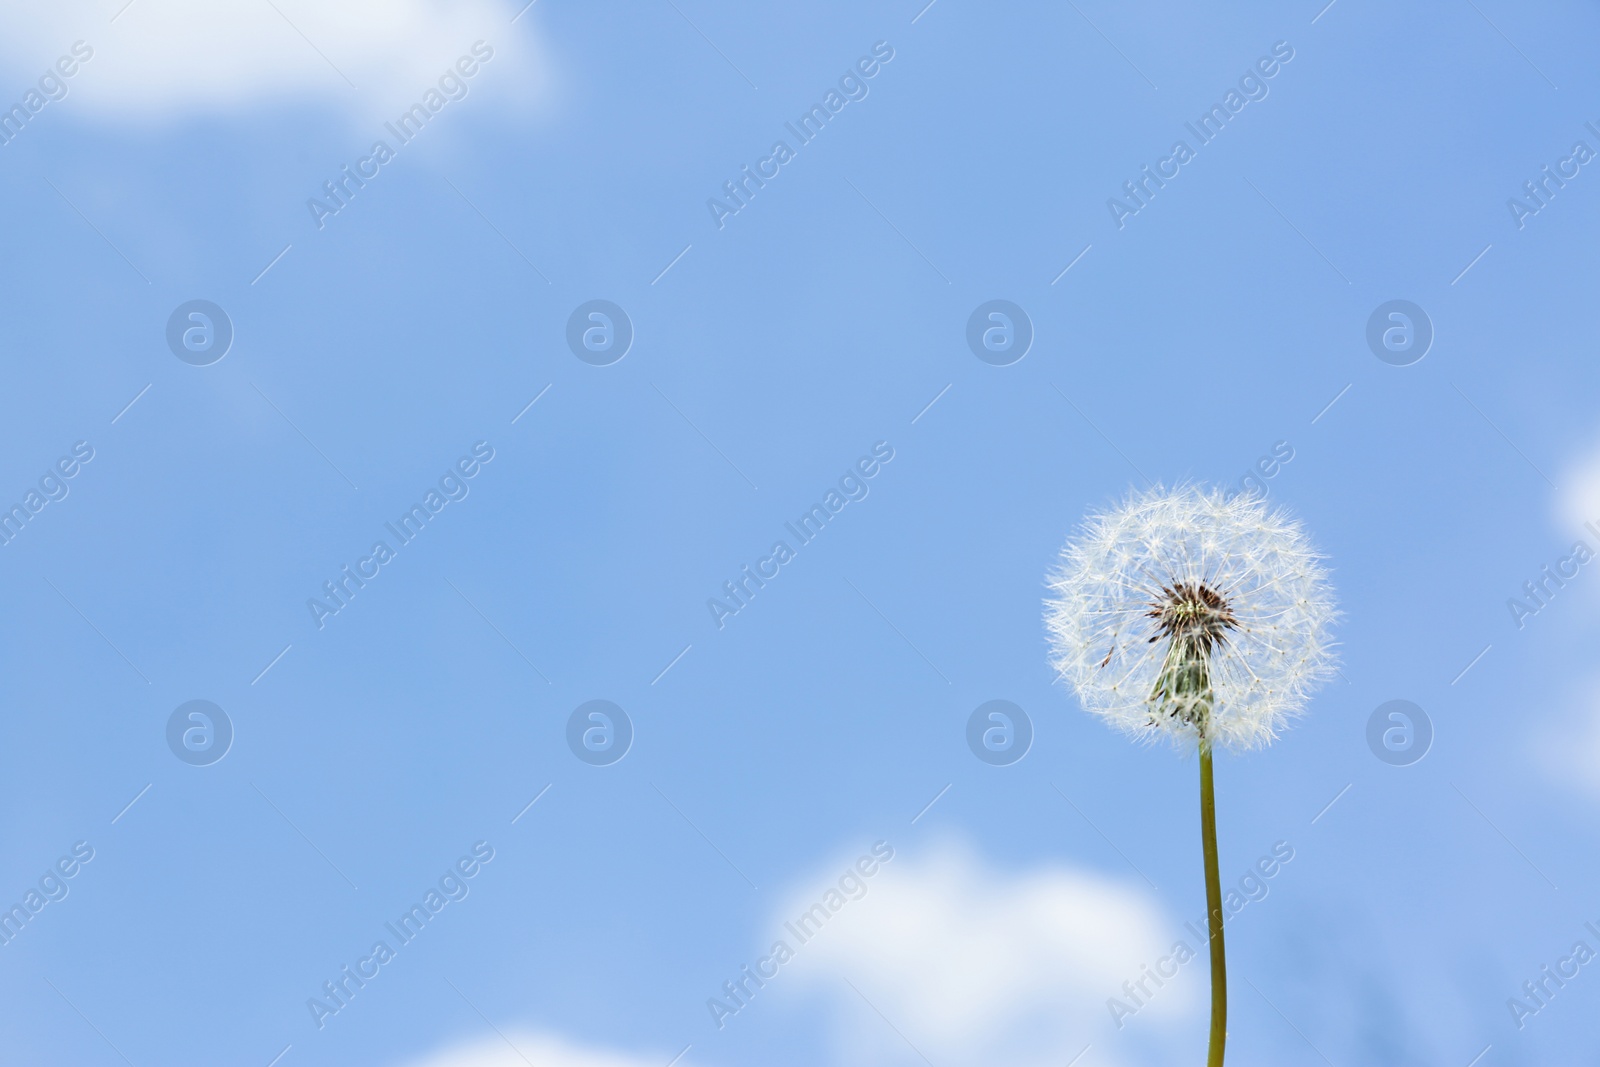 Photo of Closeup view of dandelion against blue sky, space for text. Allergy trigger